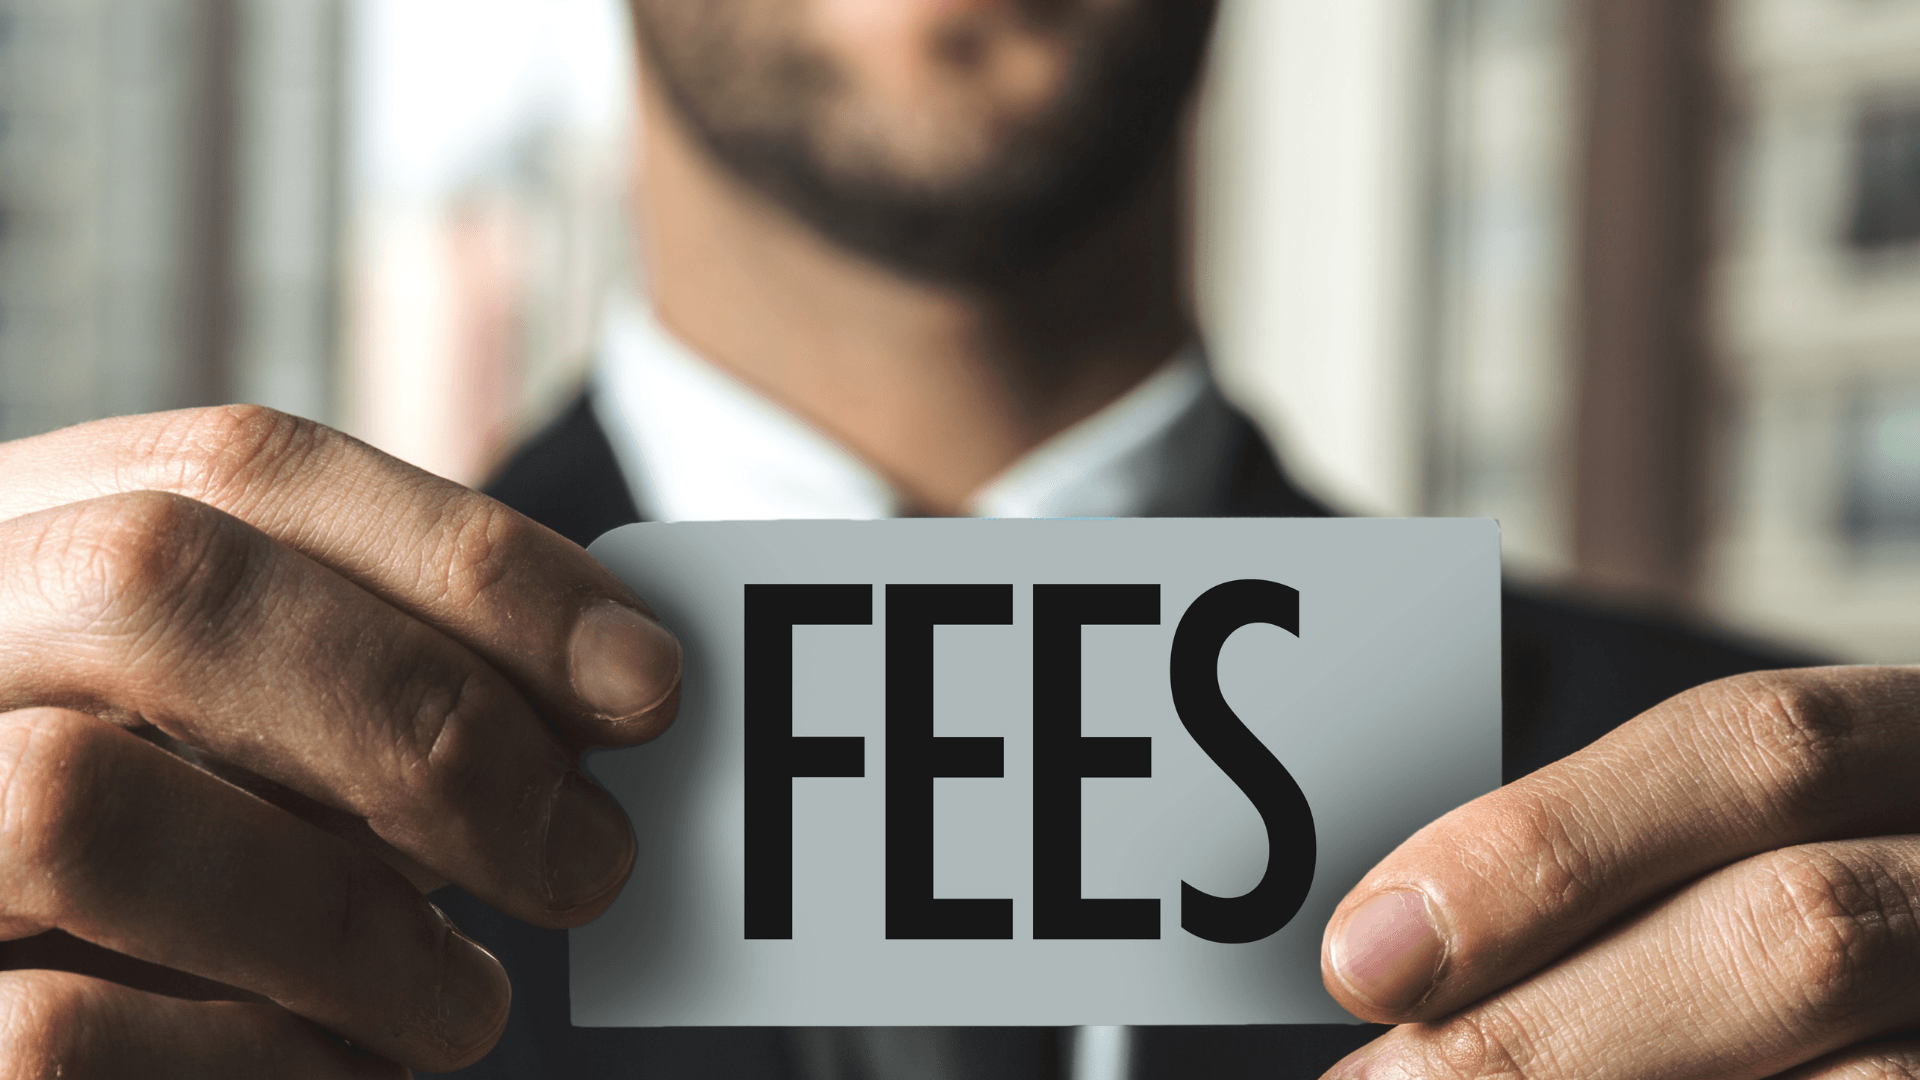 Property manager displaying 'fees' sign